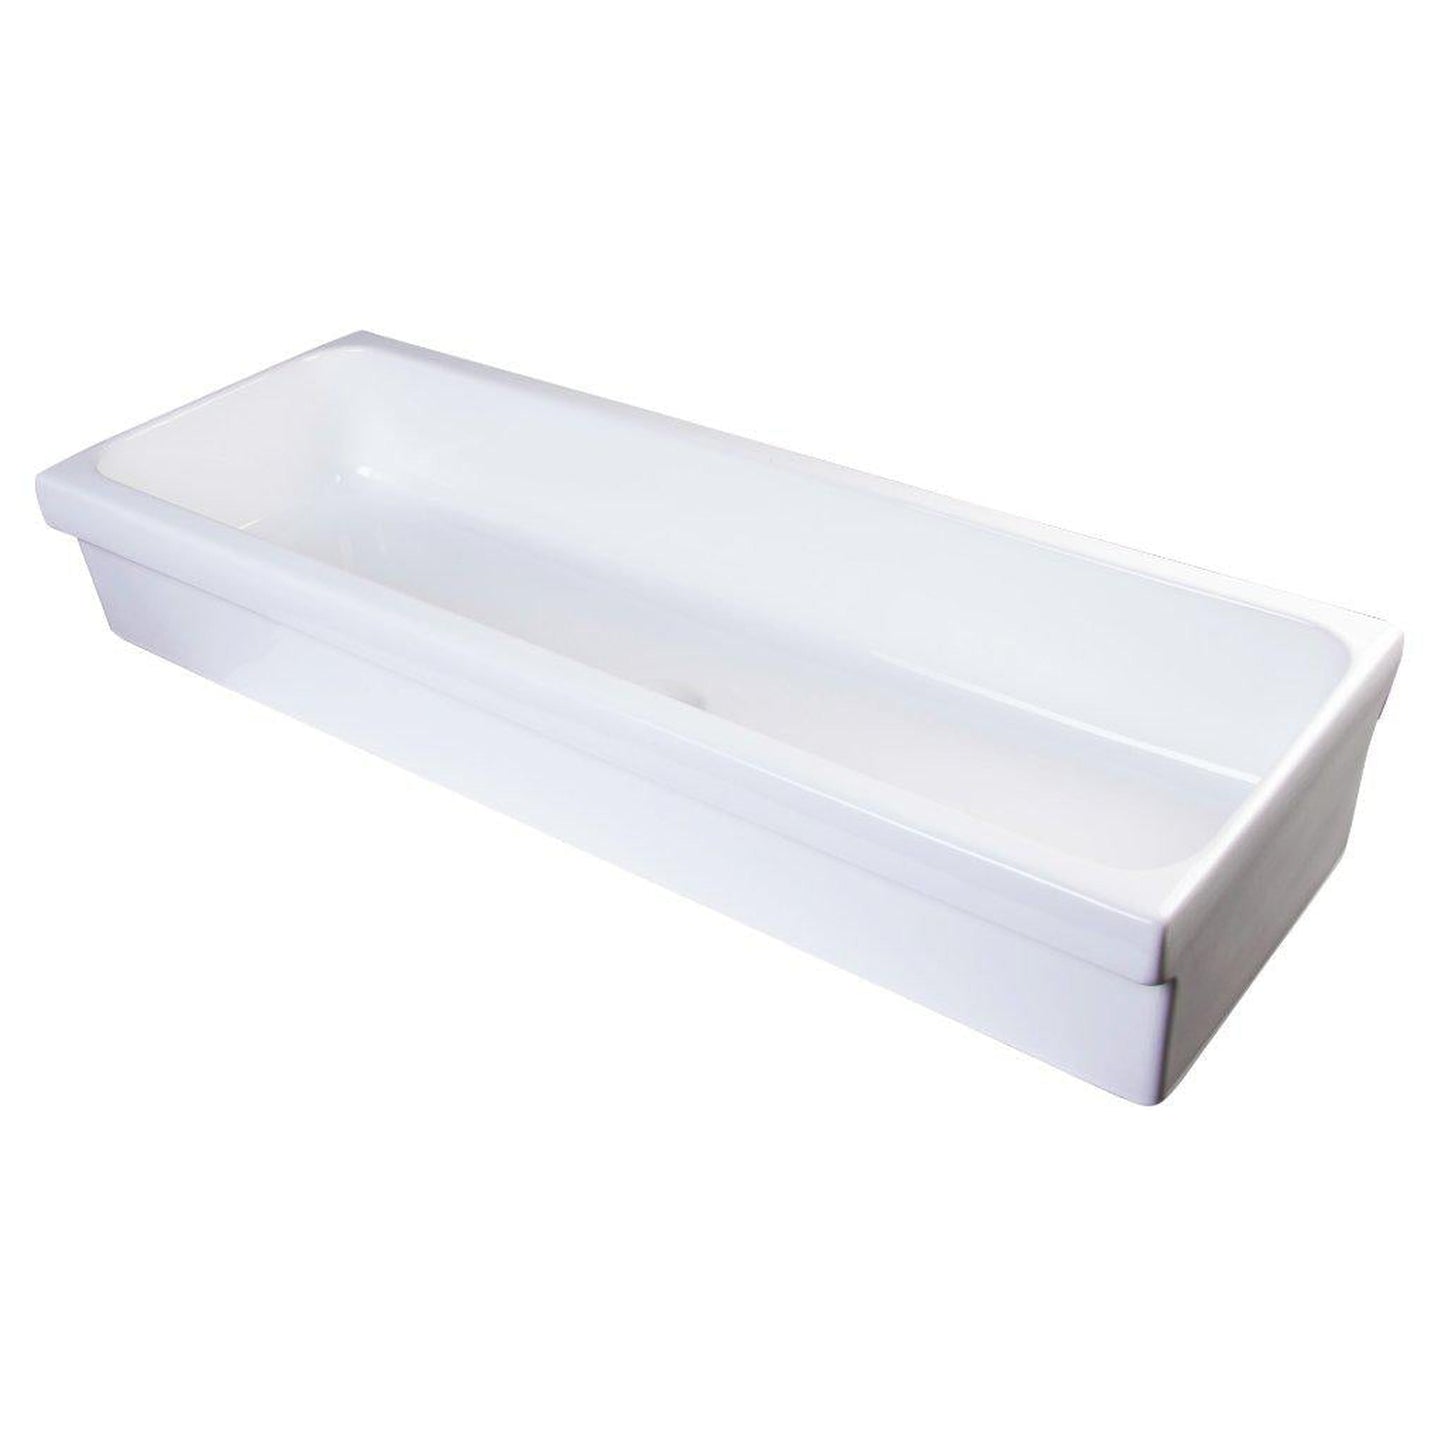 ALFI Brand AB48TR 48" White Above Mount Rectangle Fireclay Trough Bathroom Sink With Overflow